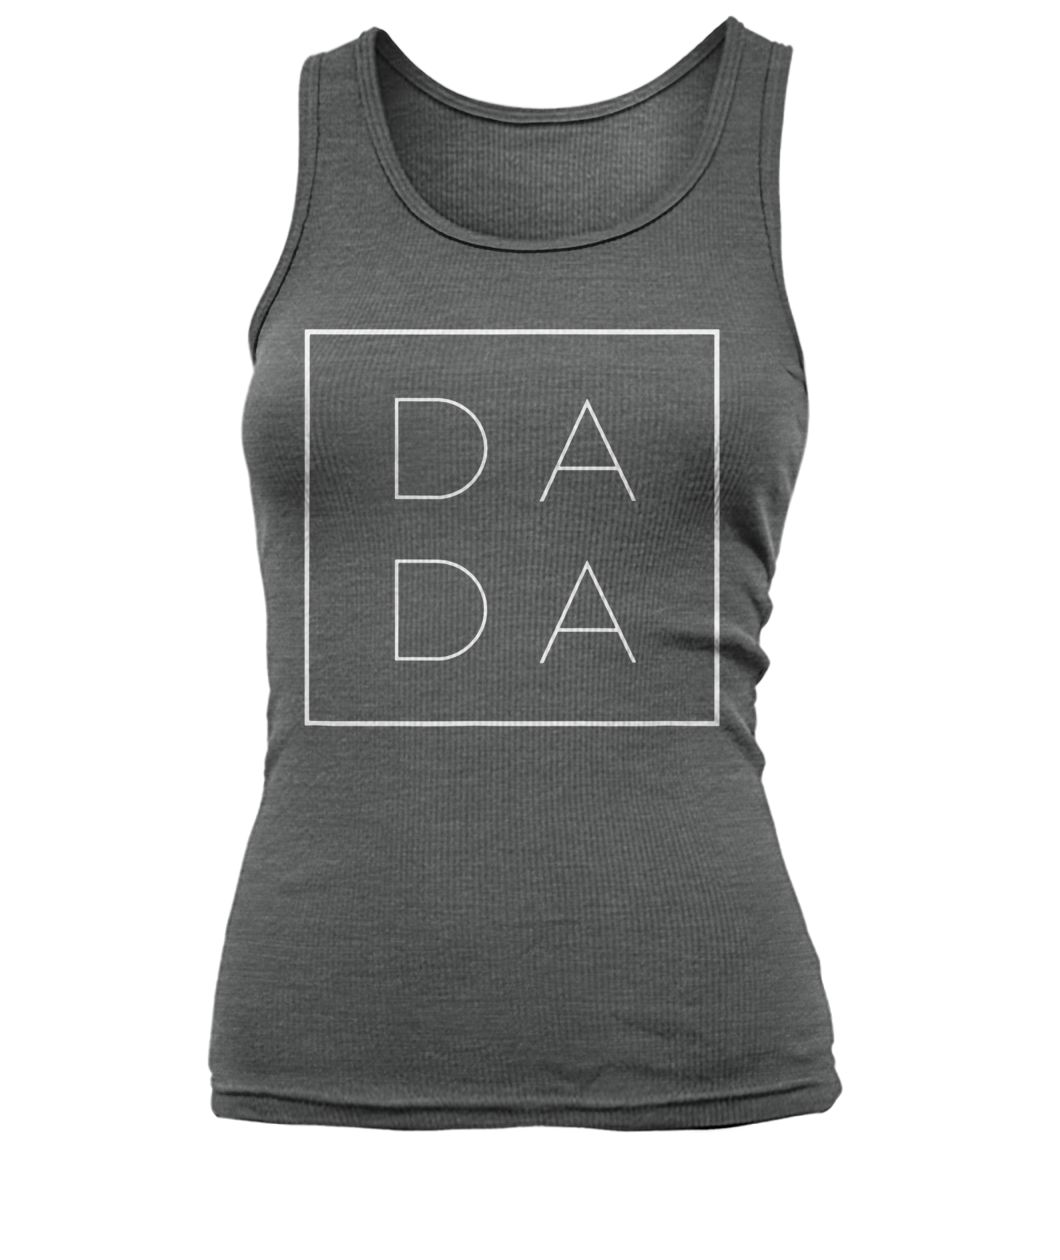 Father's day dada square women's tank top